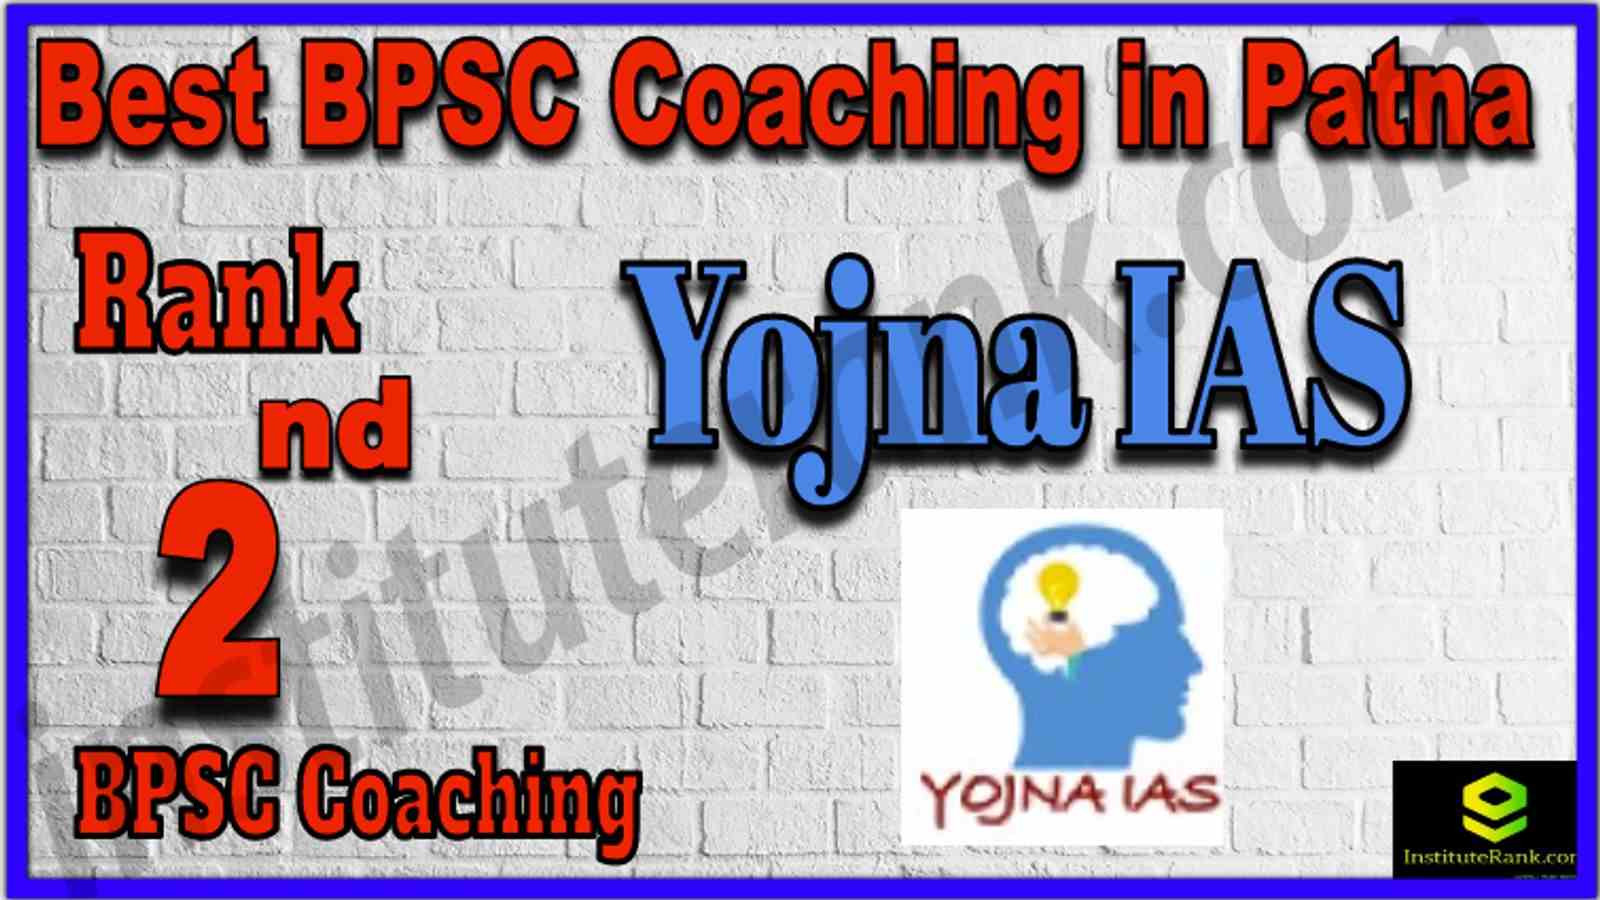 Best BPSC Coaching in Patna Rank 2nd